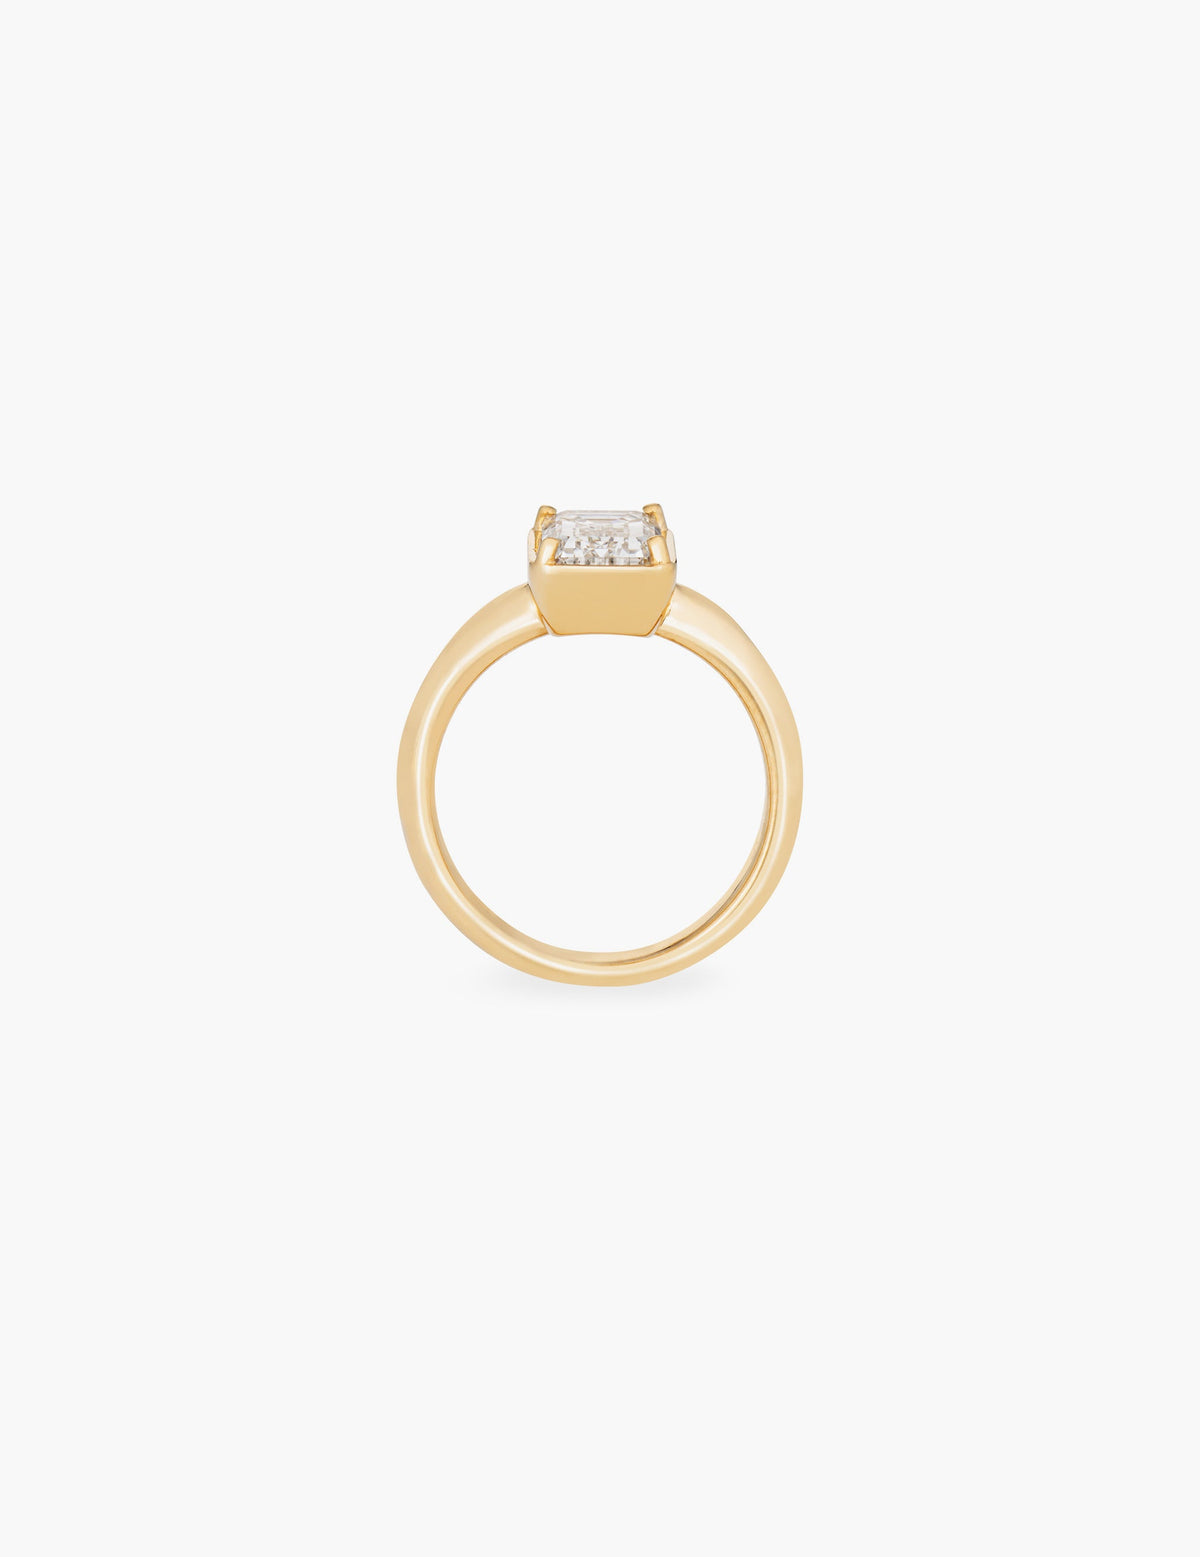 Colette Ring with 2.02ct lab grown emerald cut diamond